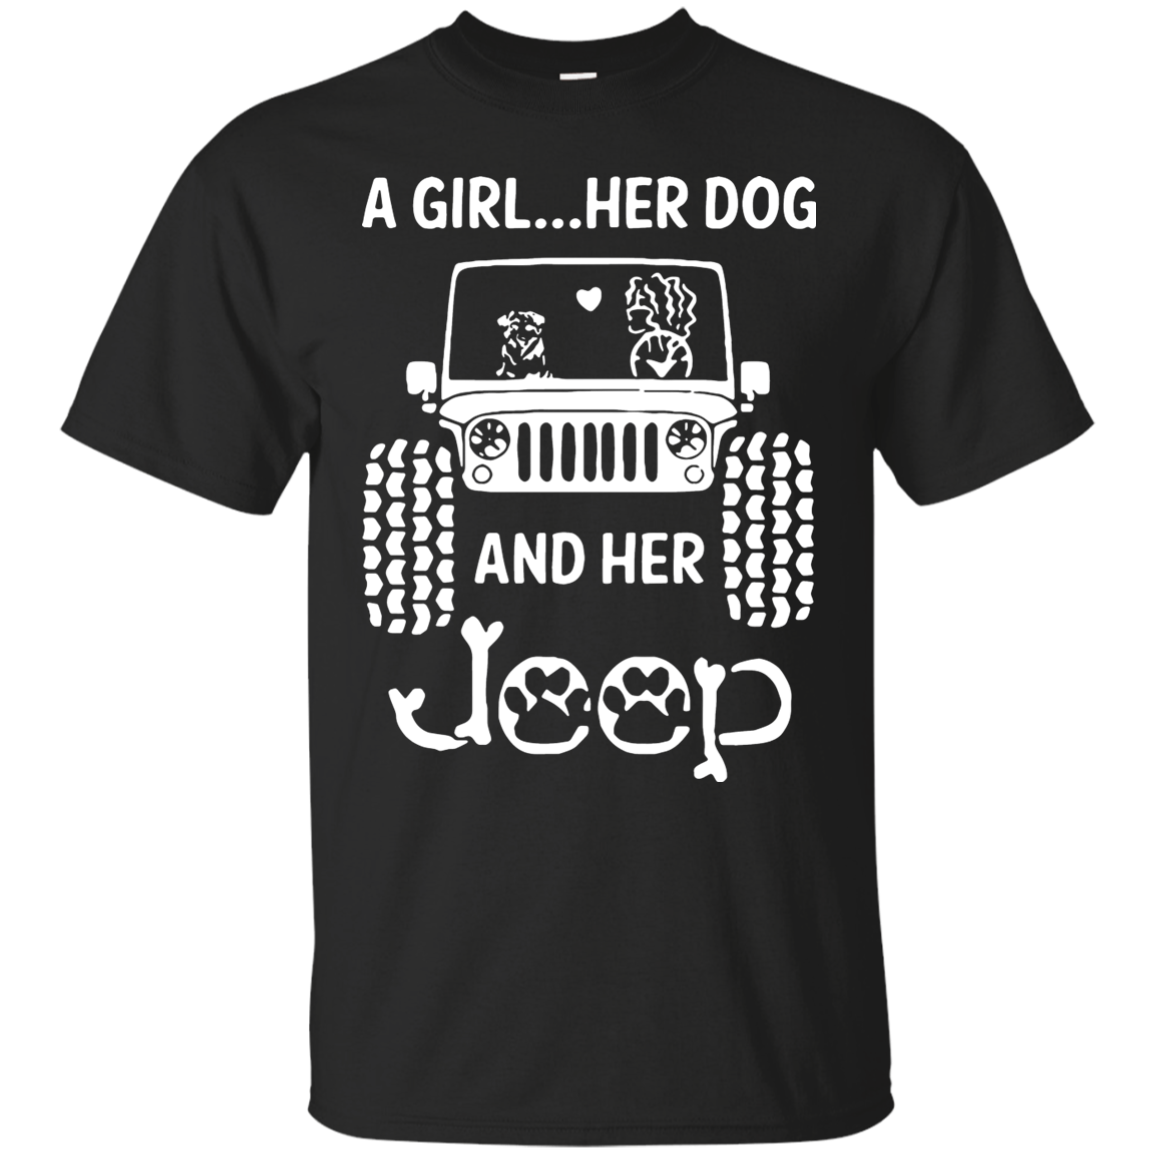 A Girl Her Dog and Her Jeep shirt